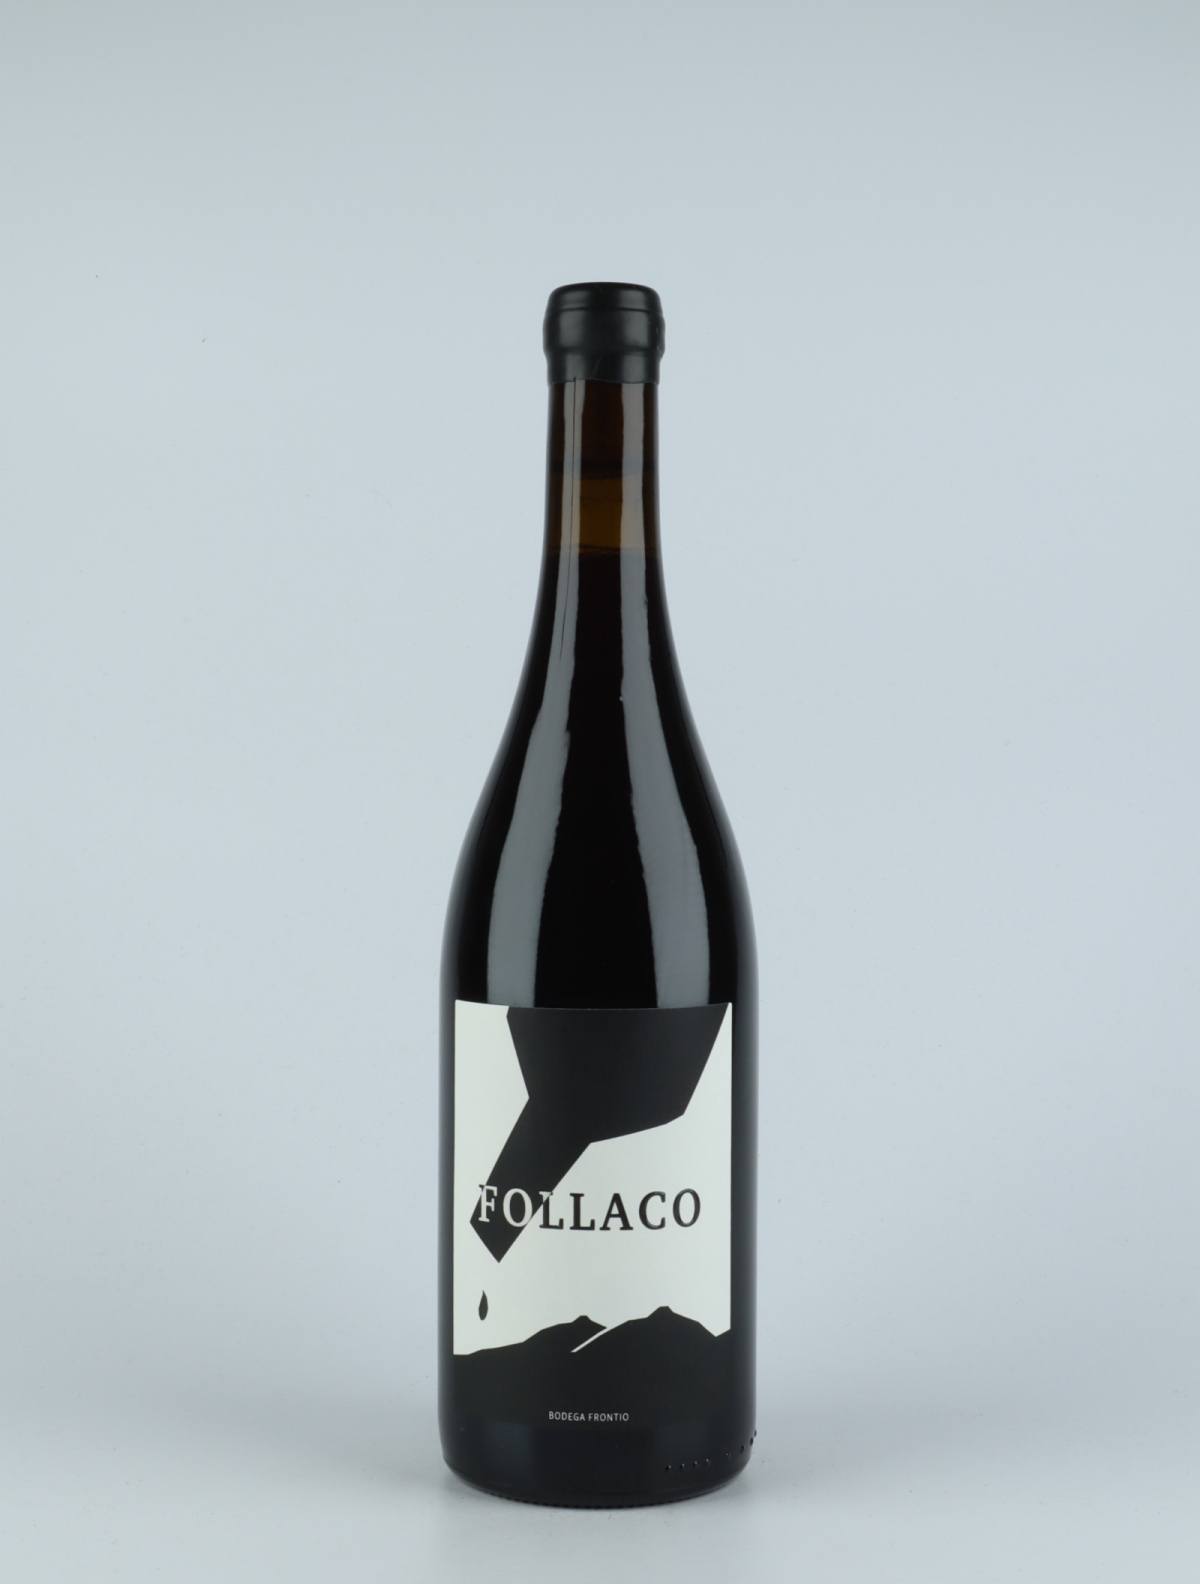 A bottle 2019 Follaco Red wine from Bodega Frontio, Arribes in Spain